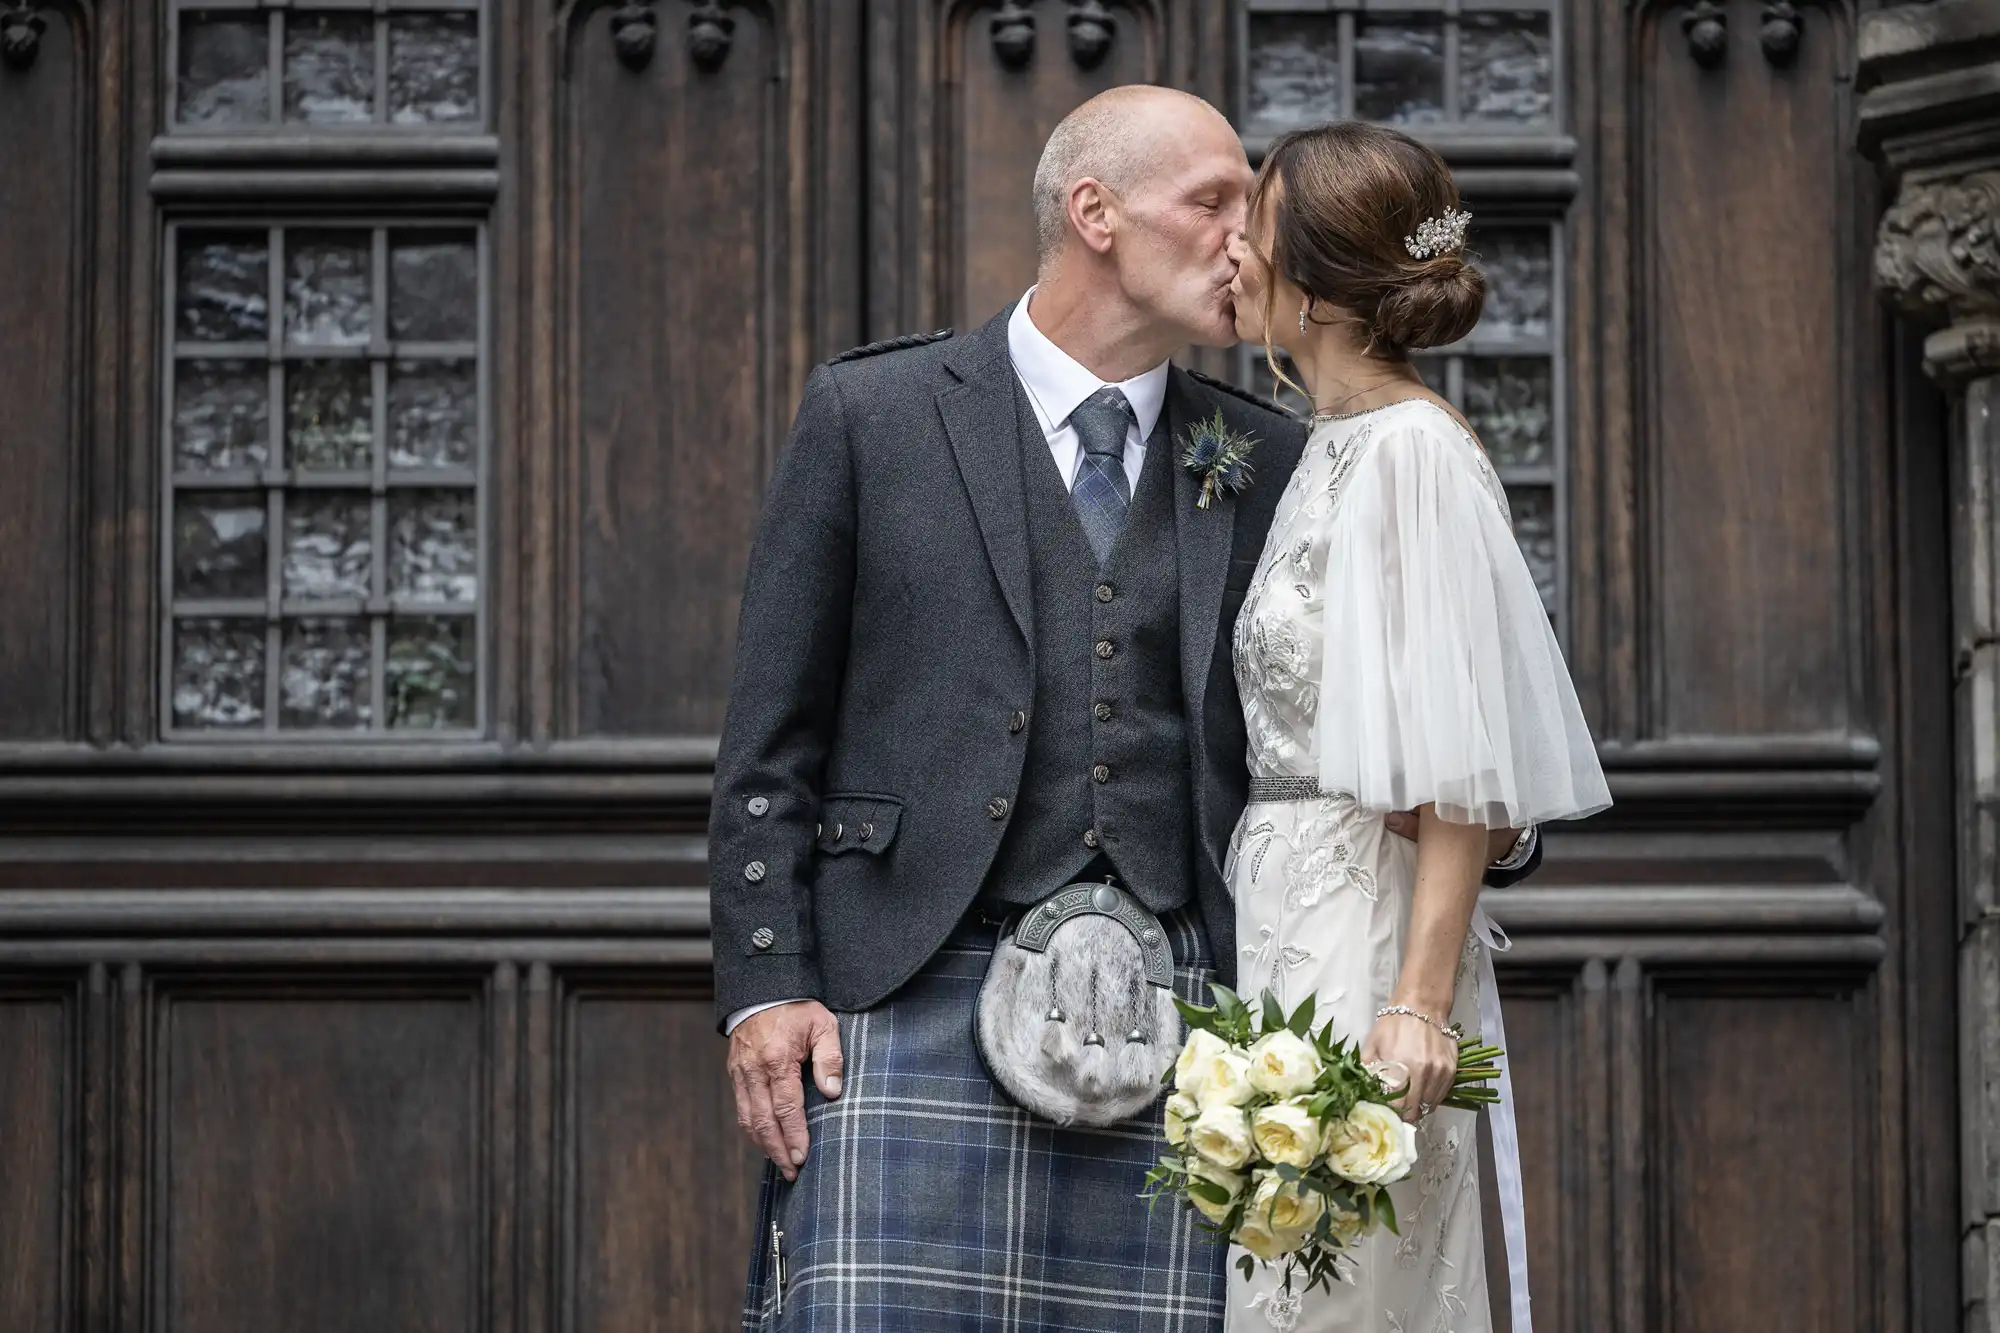 A couple in wedding attire kiss in front of a wooden door. The man wears a kilt and a grey jacket, and the woman wears a white dress and holds a bouquet of flowers.